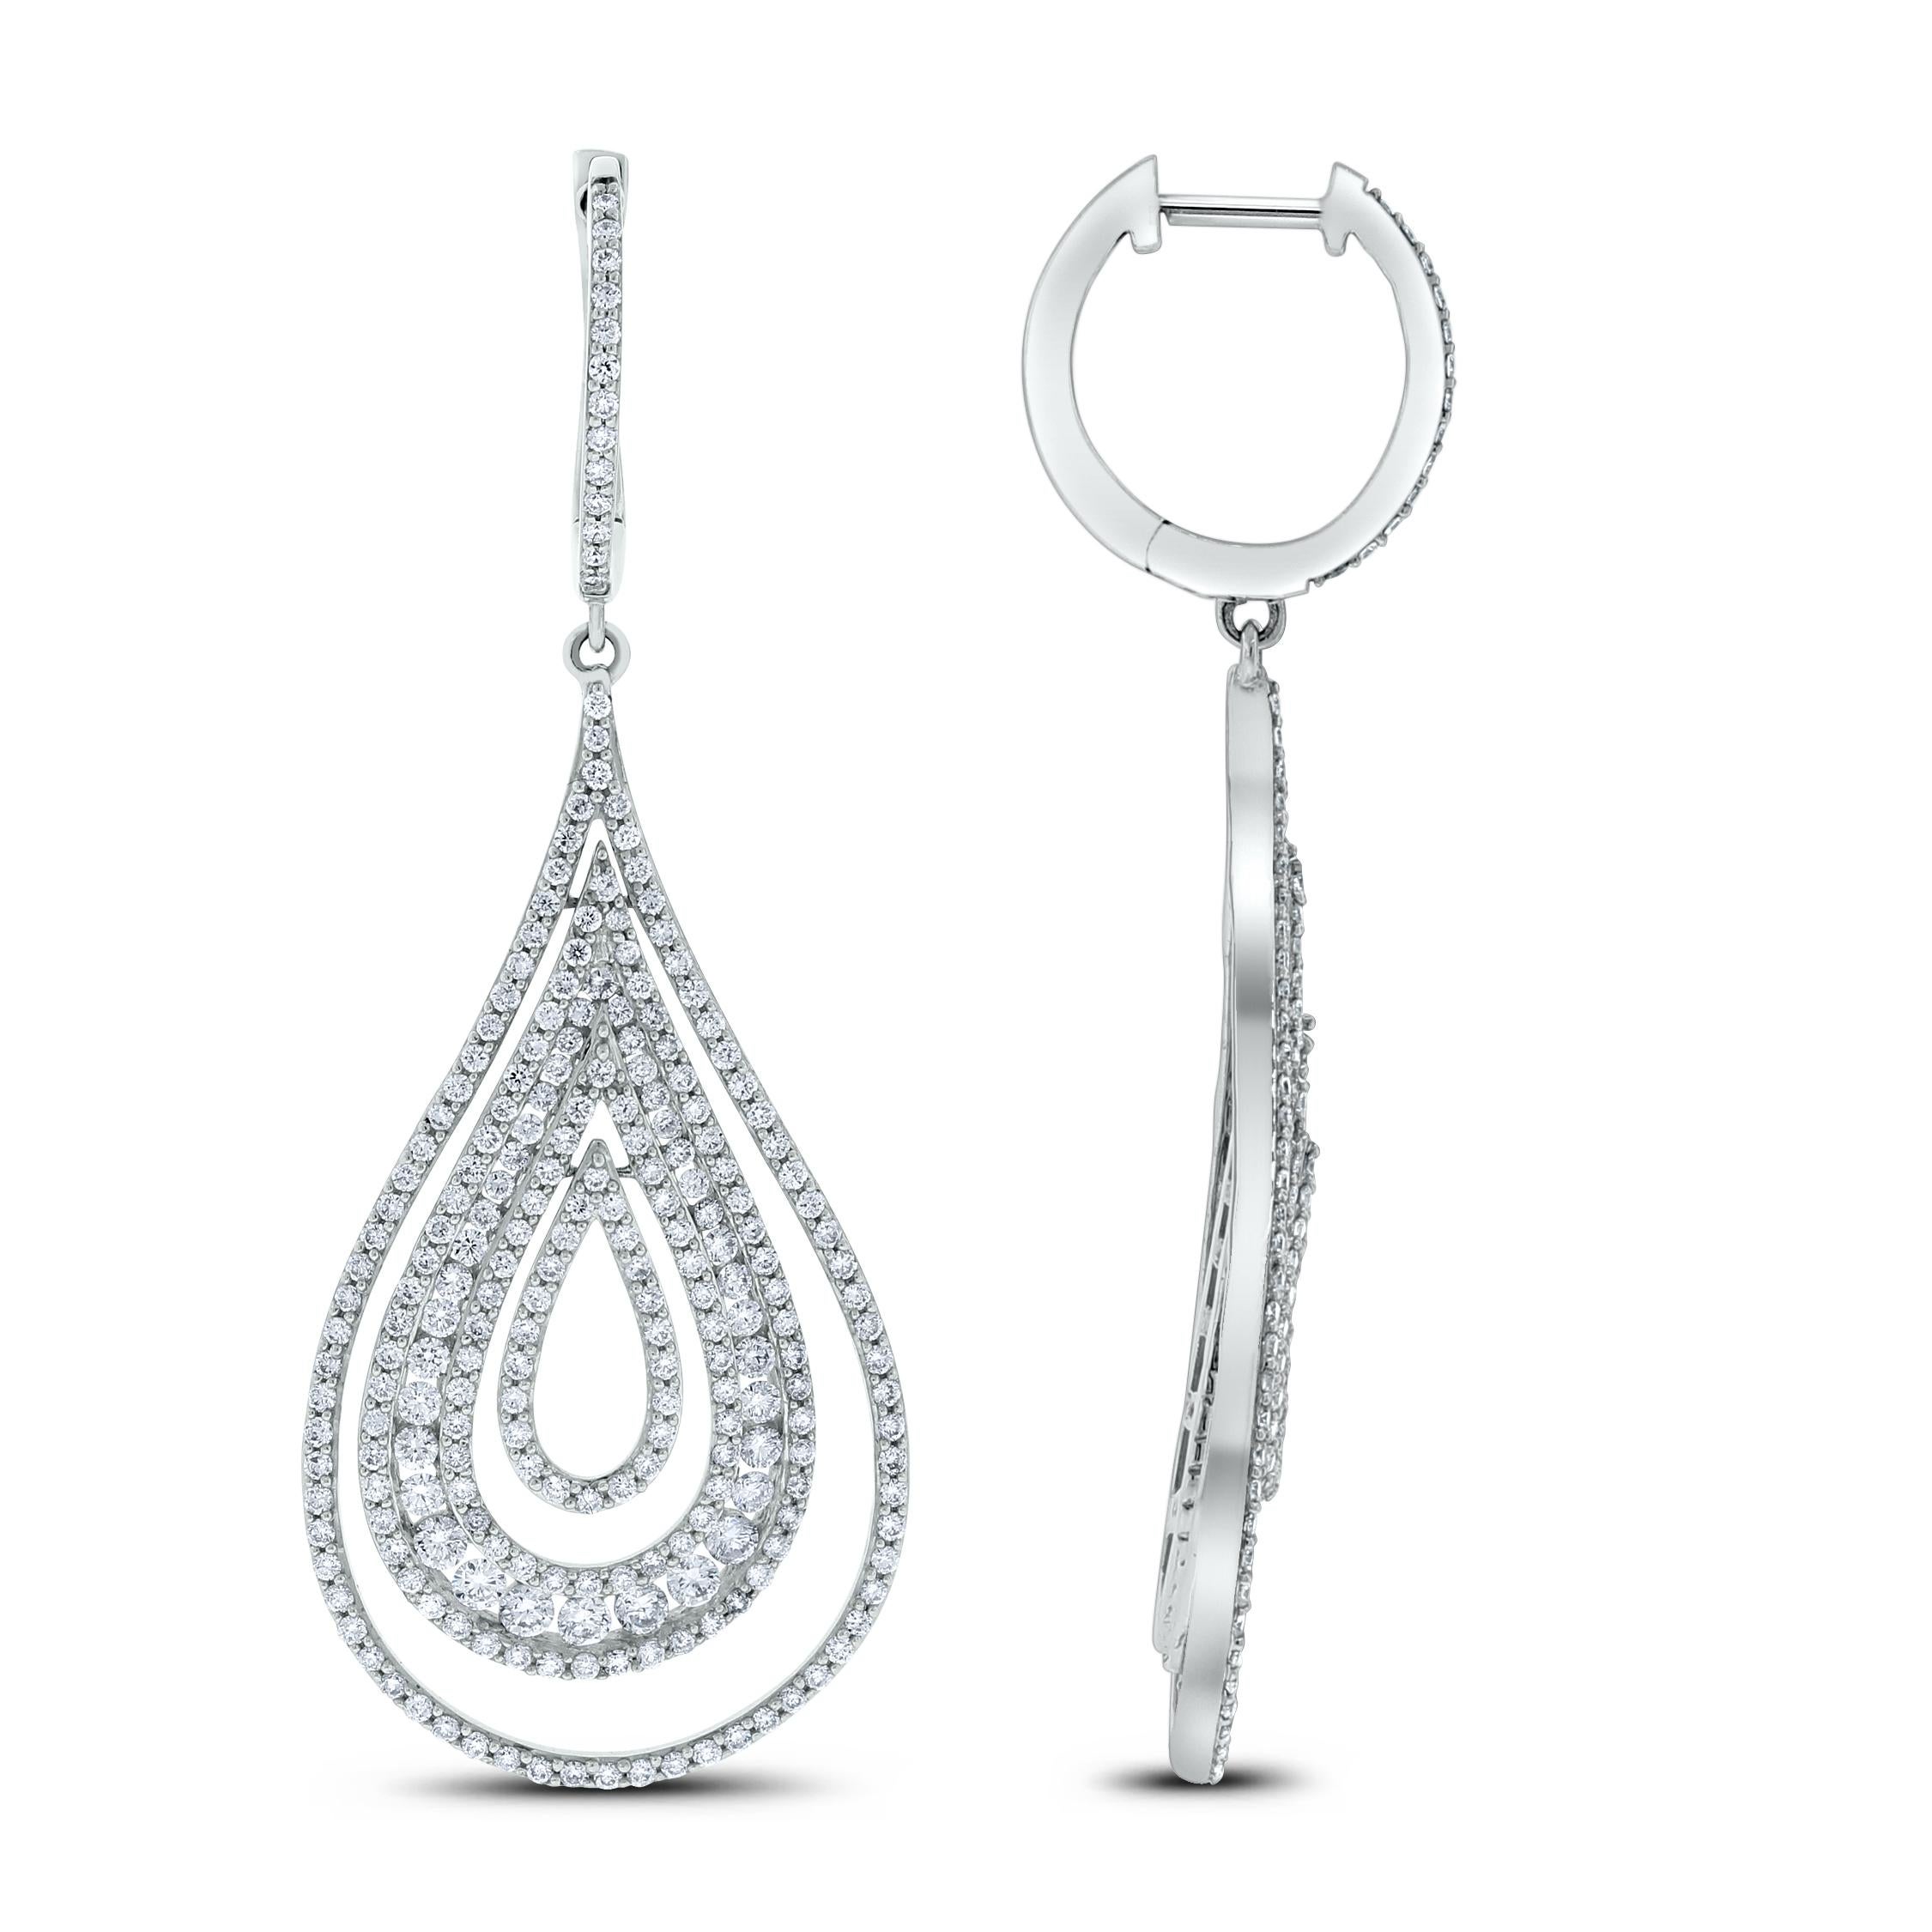 Elegantly designed and made the Beauvince Ripple Diamond earrings are soft and delicate yet glamorous.

Diamonds Shape: Round 
Diamonds Weight: 4.29 ct 
Diamond Color: F - G 
Diamond Clarity: VS - SI (Very Slightly Included - Slightly Included)